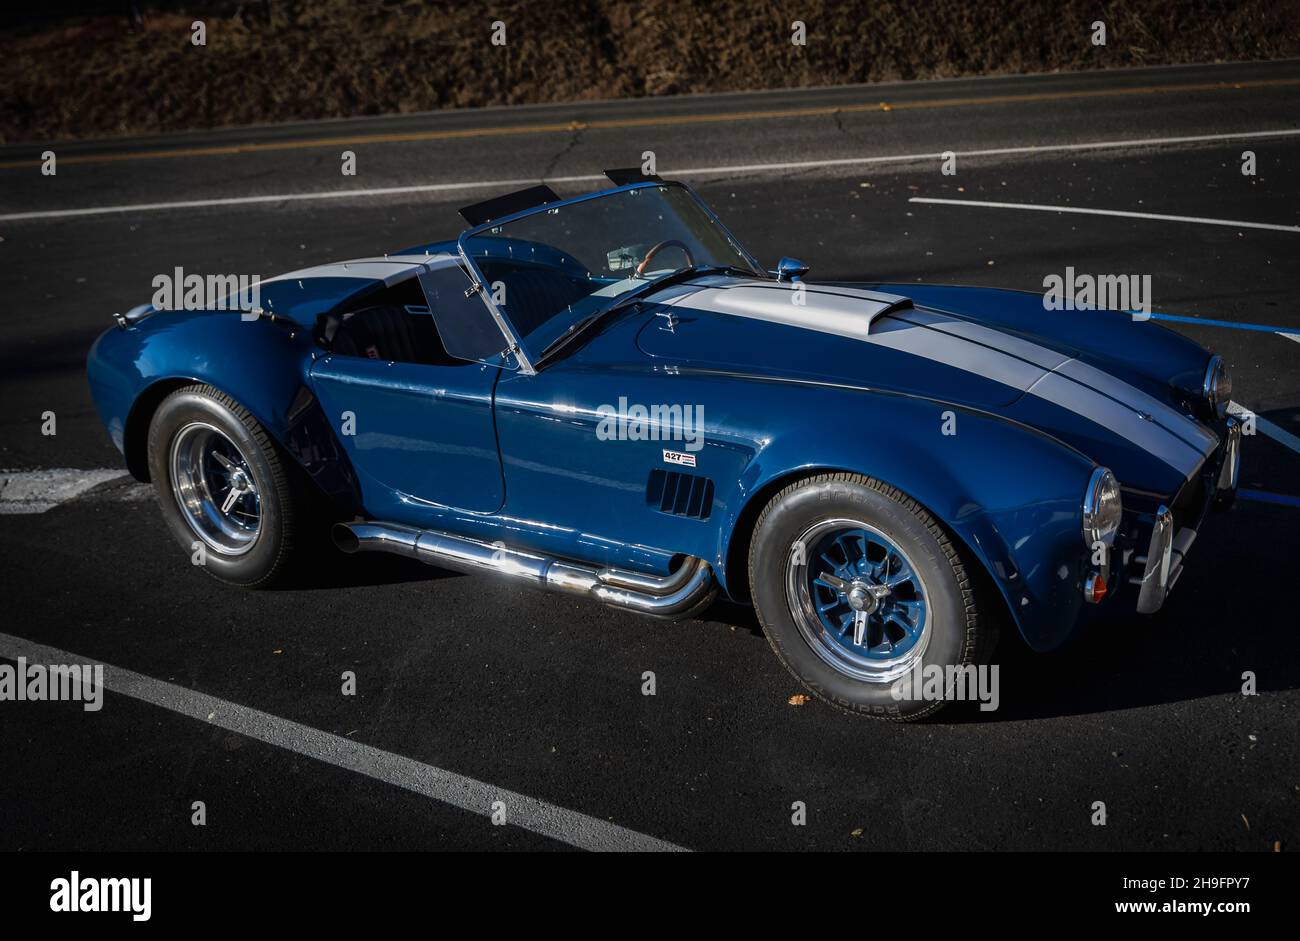 Placerville, USA - November 25, 2020: Classic rare American muscle car, convertible vintage blue 1967 Ford Shelby Cobra 427 Stock Photo